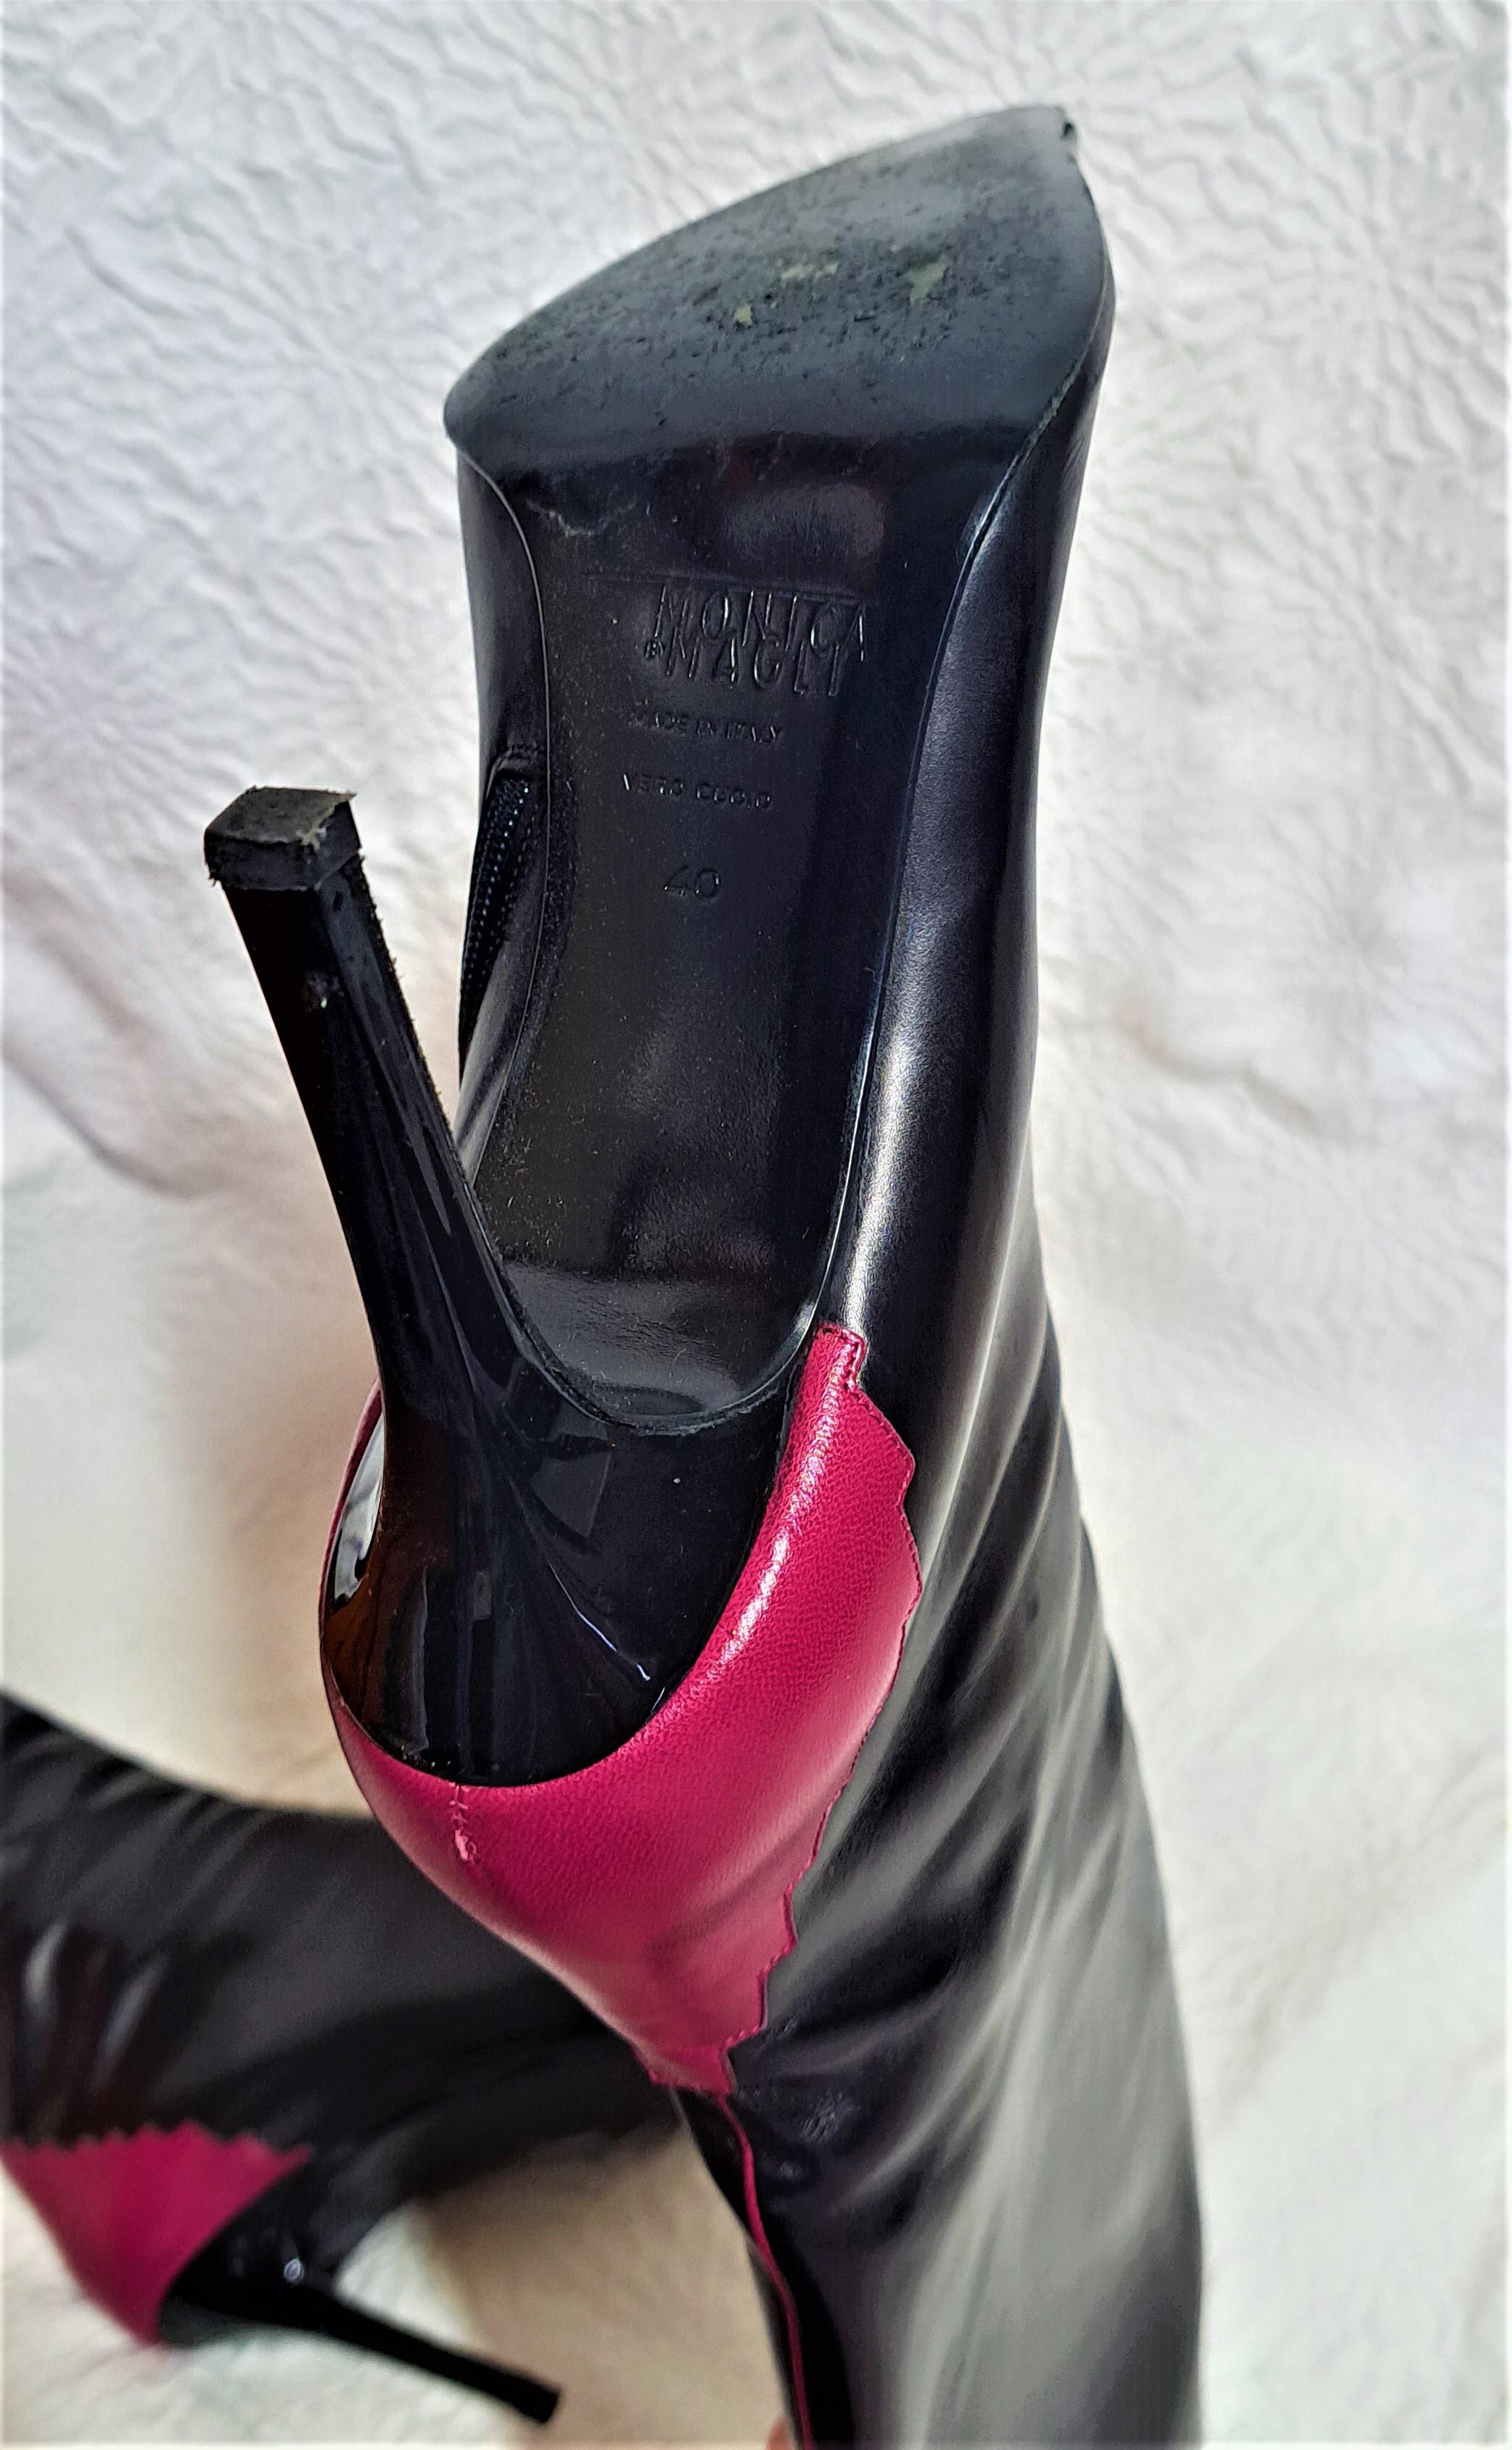 Monica by Bruno Magli High Heels Black Leather Boots with Fuchsia For Sale 2